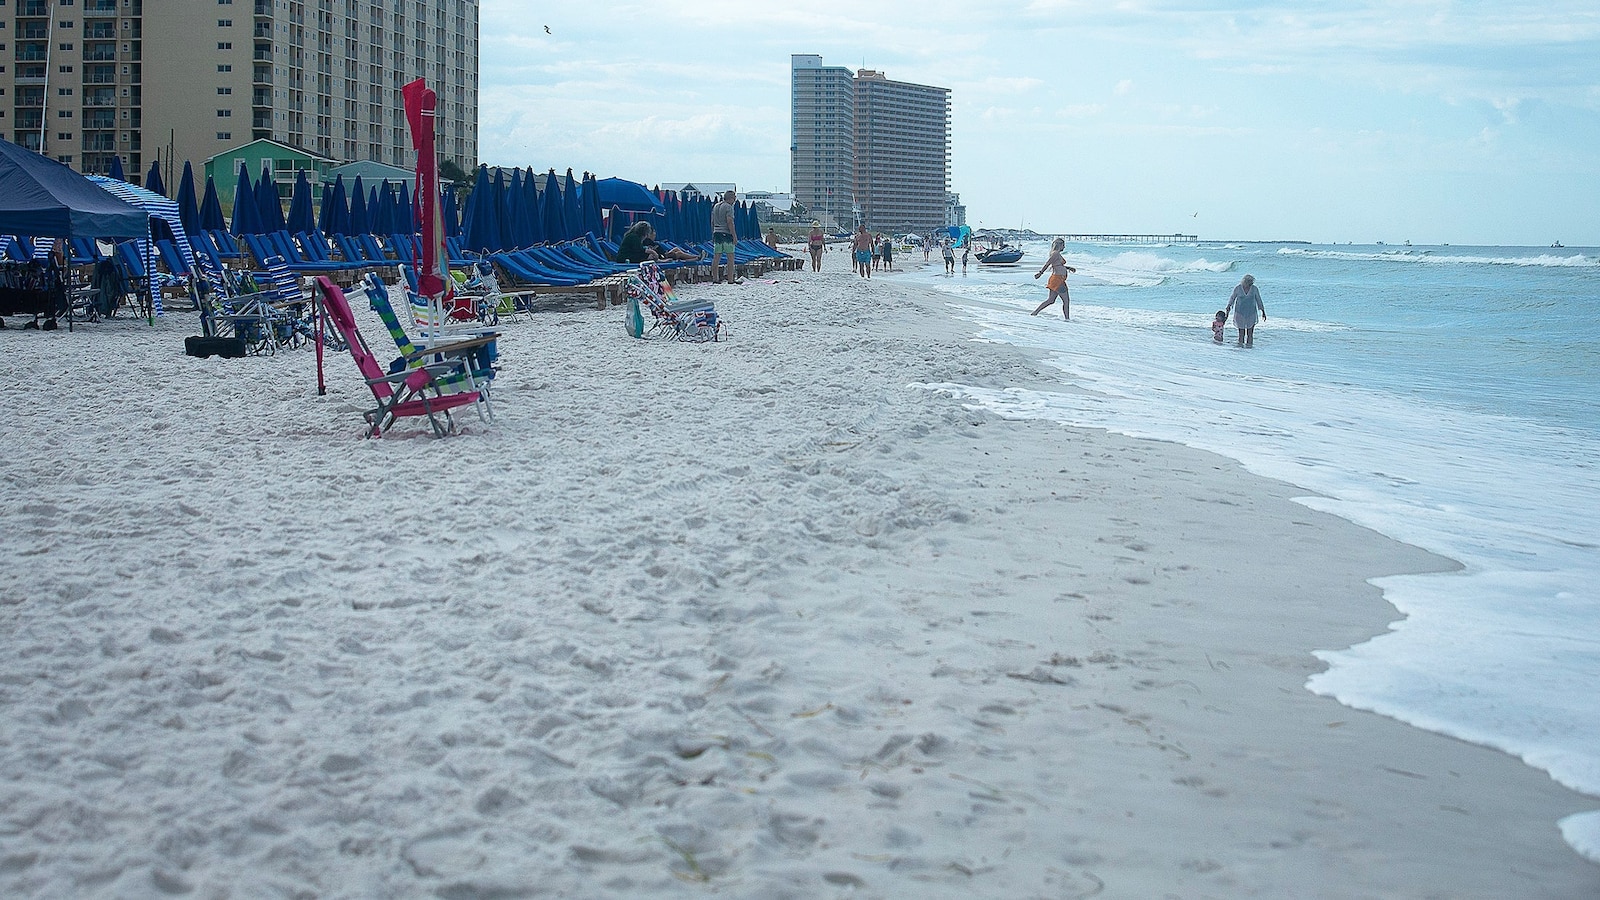 3 young men drown while swimming in Gulf Coast: Police